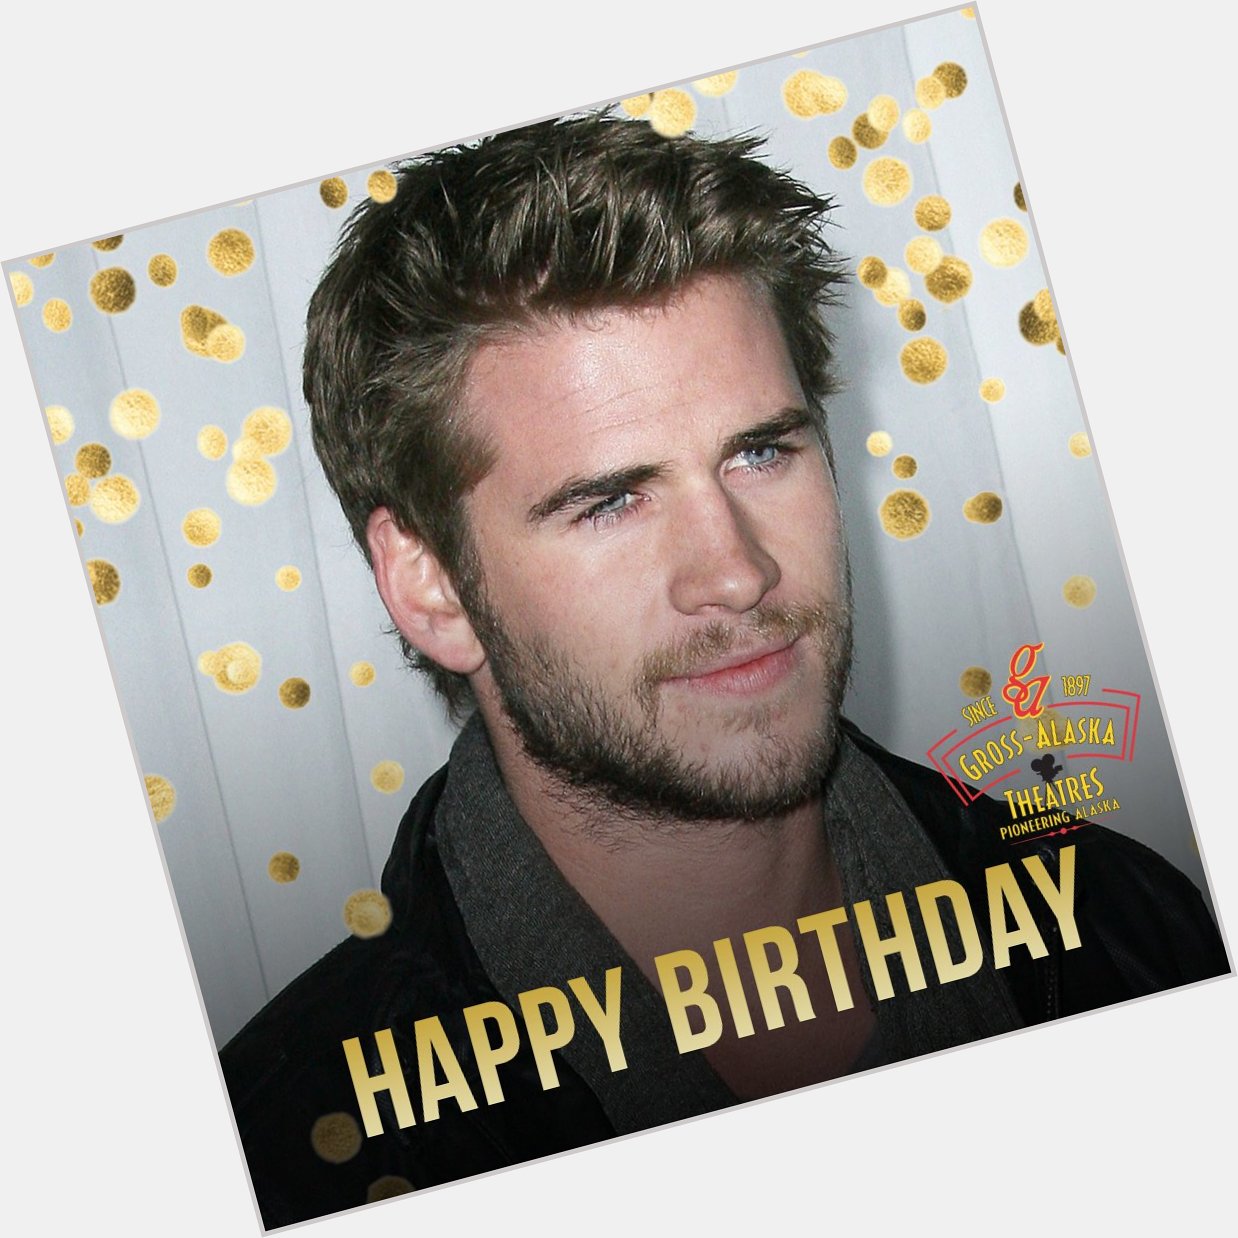 Happy Birthday Liam Hemsworth!
Do you have a favorite movie that he\s been in? 